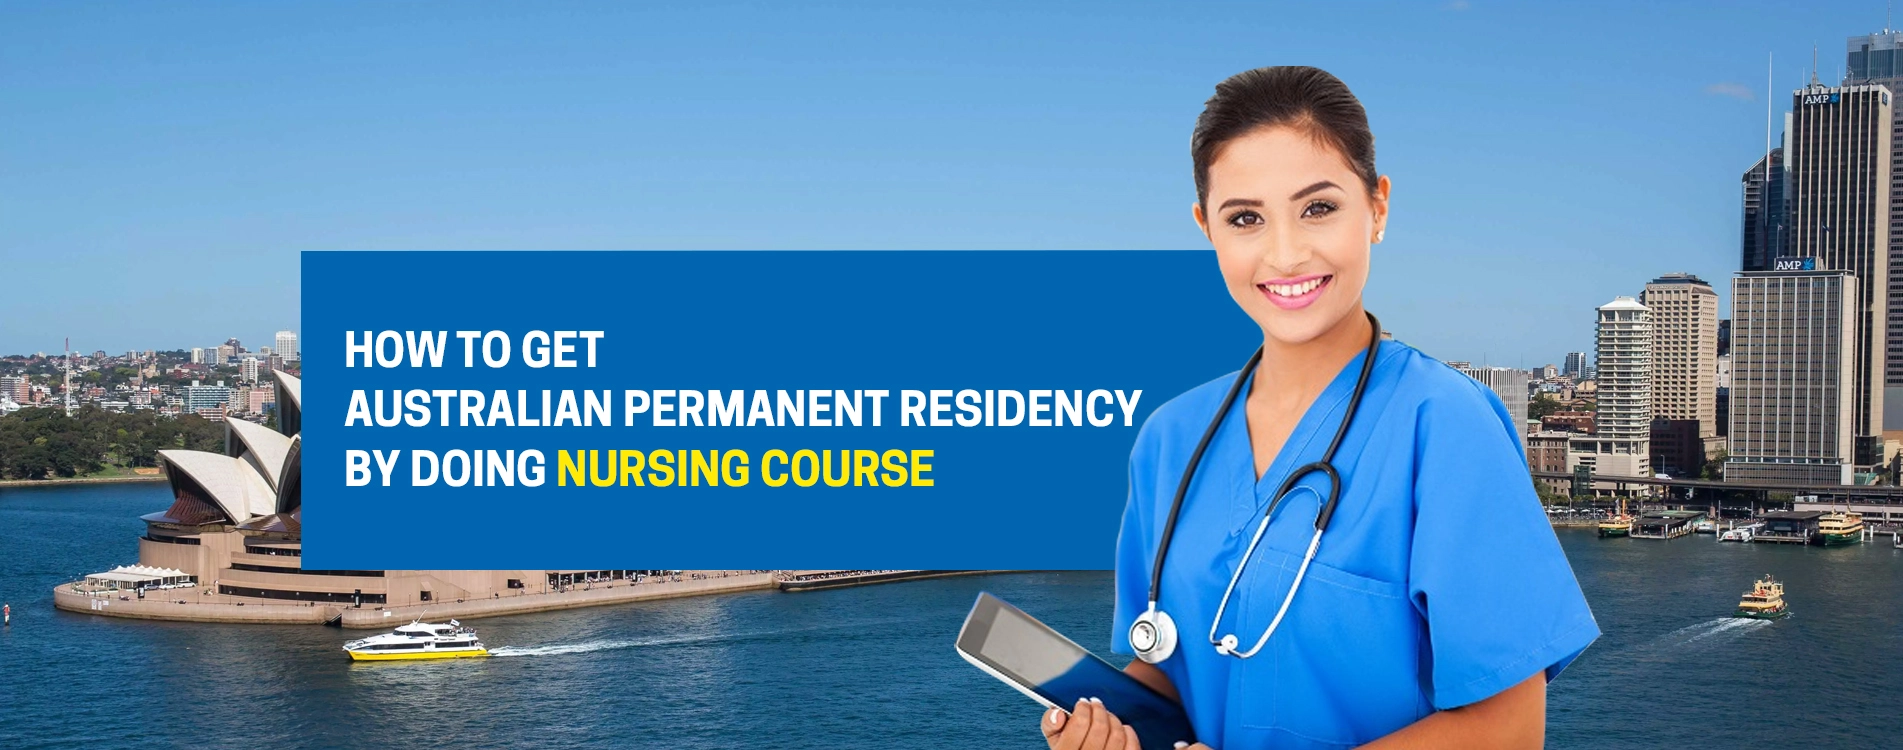 How to Get Australian Permanent Residency by Doing a Nursing Course